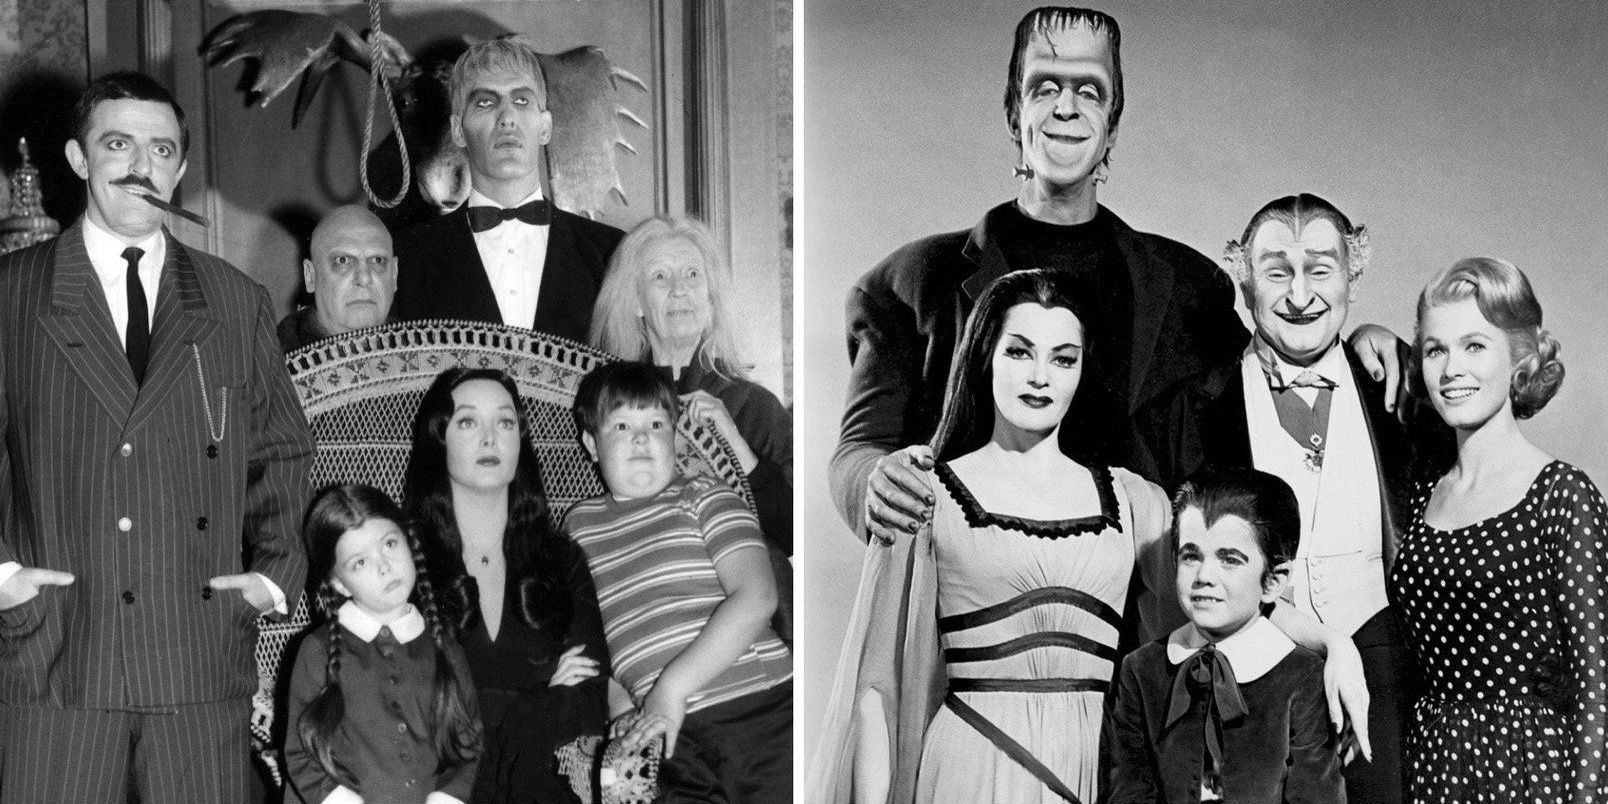 The Addams Family and The Munsters